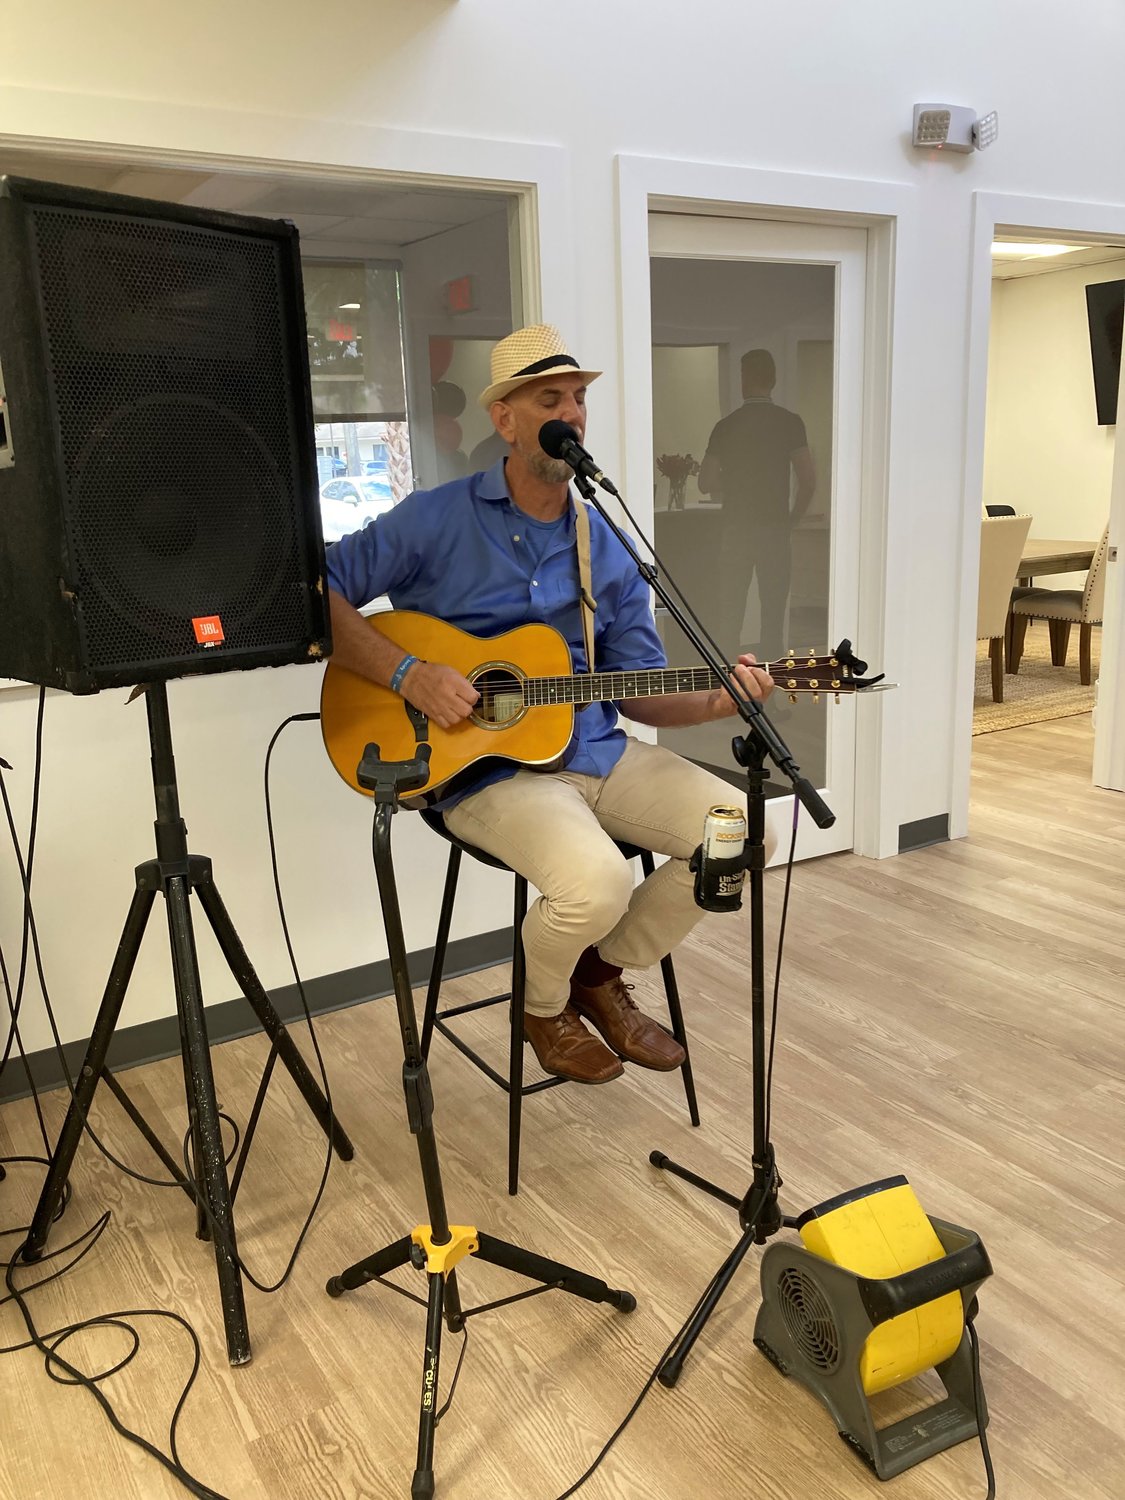 There was live music at the grand opening of Keller Williams Realty Atlantic Partners’ new office.